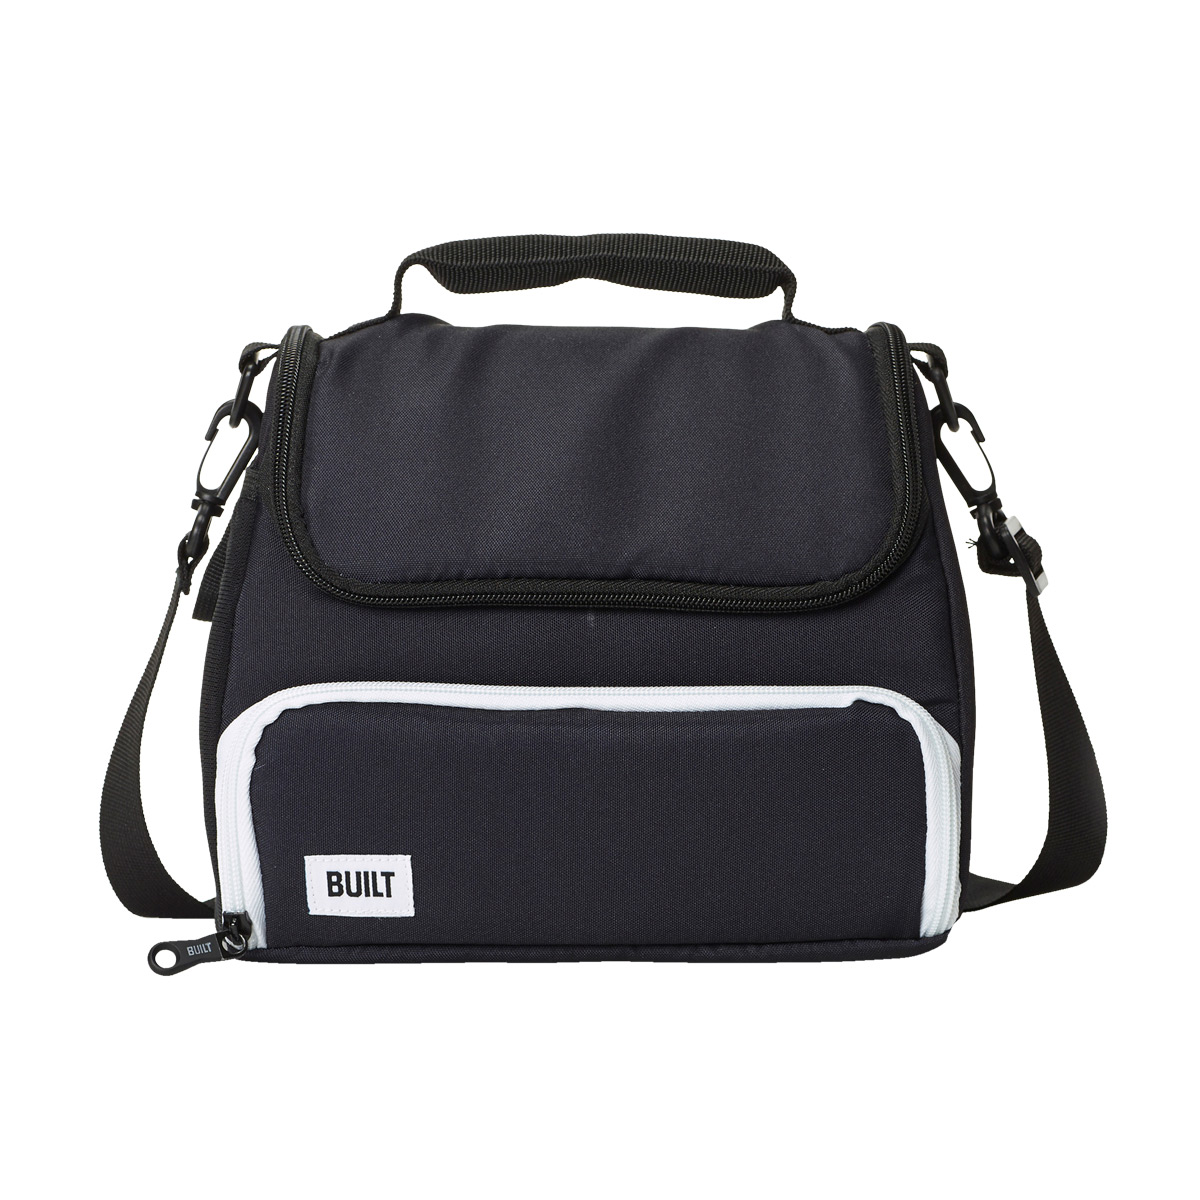 https://www.containerstore.com/catalogimages/347910/10075719-Prime-Lunch-Bag-Black-VEN1.jpg